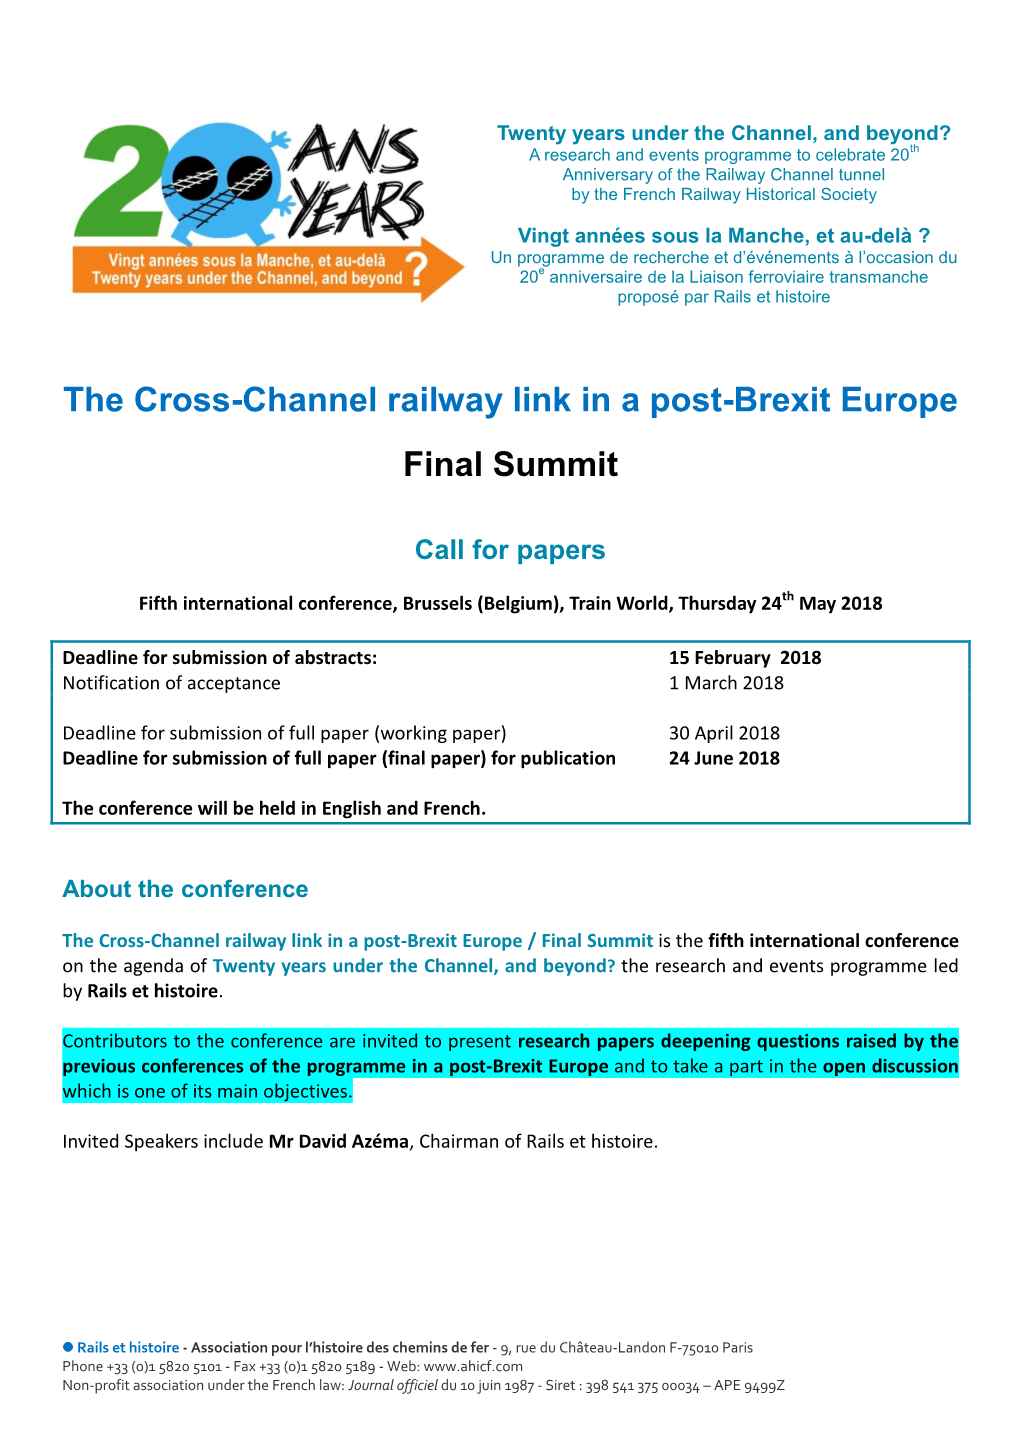 The Cross-Channel Railway Link in a Post-Brexit Europe Final Summit